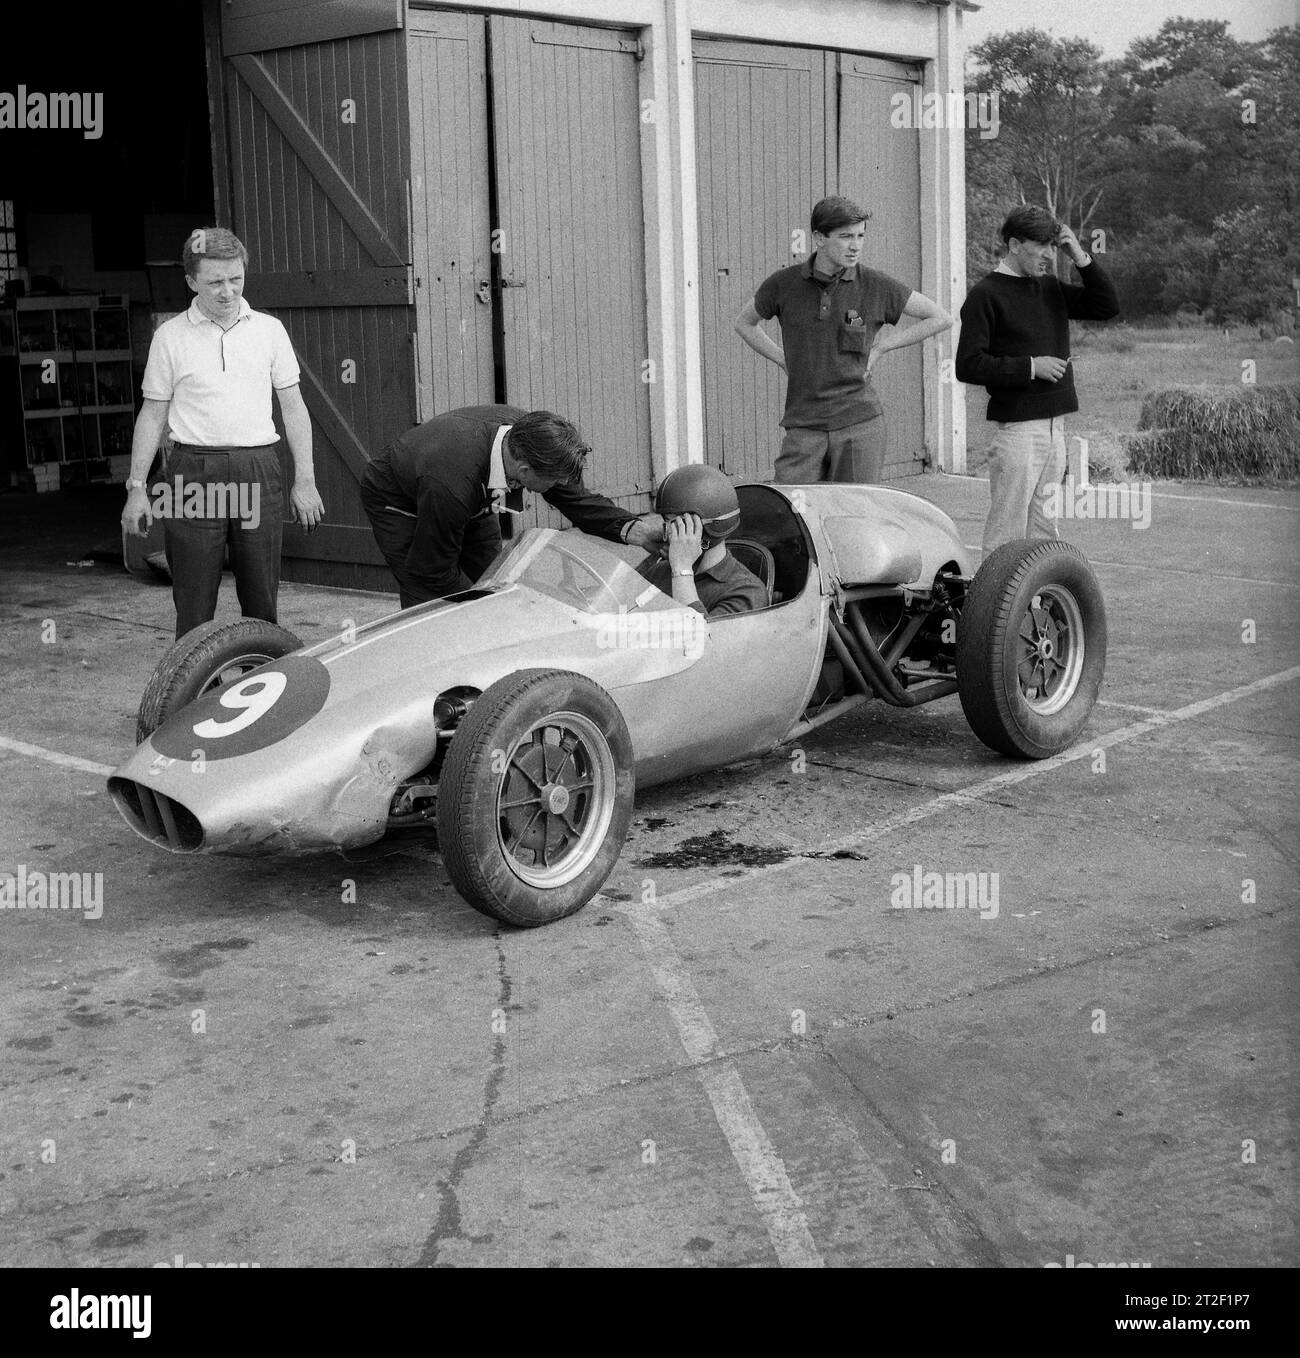 1962, historical, a young male driver sitting in an open-top Cooper racing car getting instruction outside a shed at the Finmere Aerodrome, Finemere, Bucks, England, UK, home at this time of Geoff Clarkes Motor School. The Cooper racing car, with its engine behind the driver, was innovative at the time and became the first rear-engined car to win a Formula One race. Stock Photo